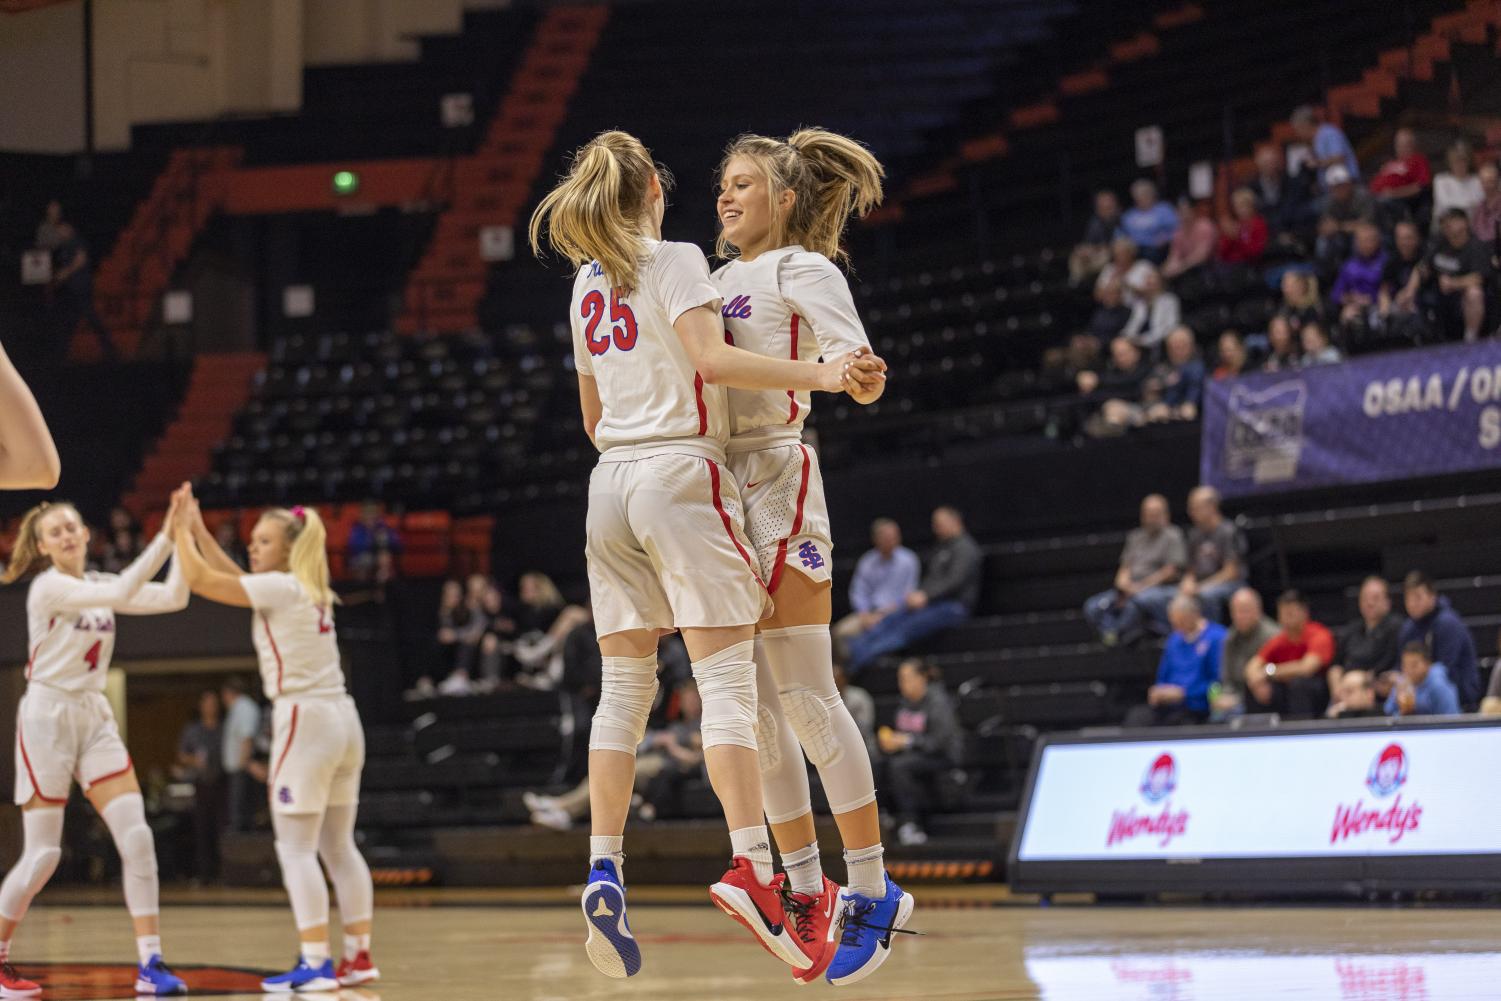 %232+Girls+Basketball+Advances+to+Semifinals+After+65%E2%80%9346+Win+Against+%237+Corvallis